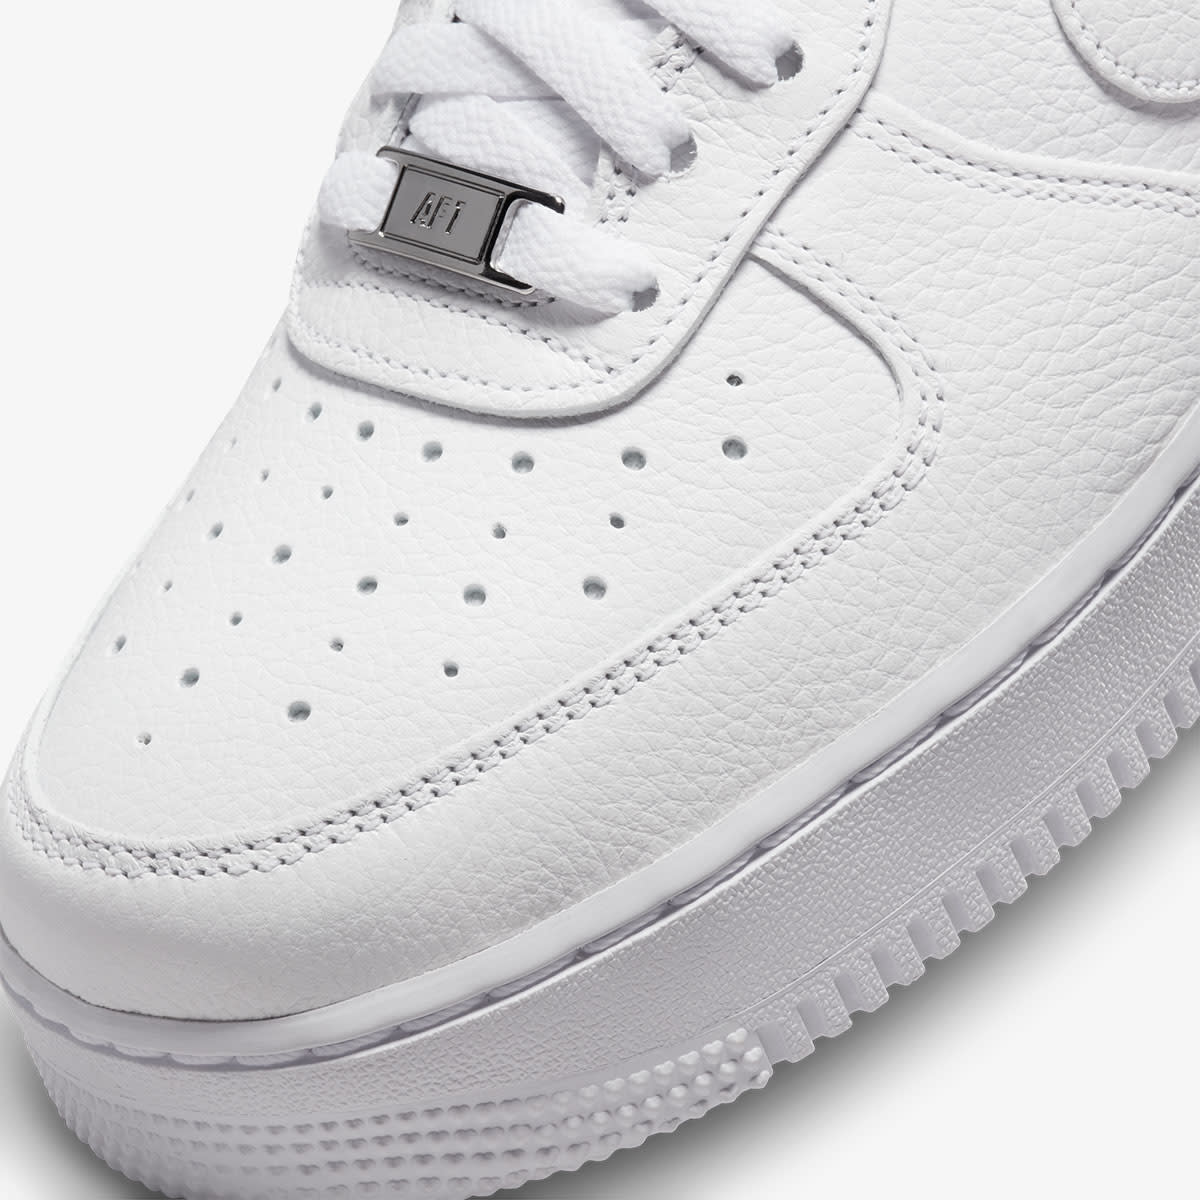 Nike x Nocta Air Force 1 Low Sp (White & Colbalt Tint) | END. Launches